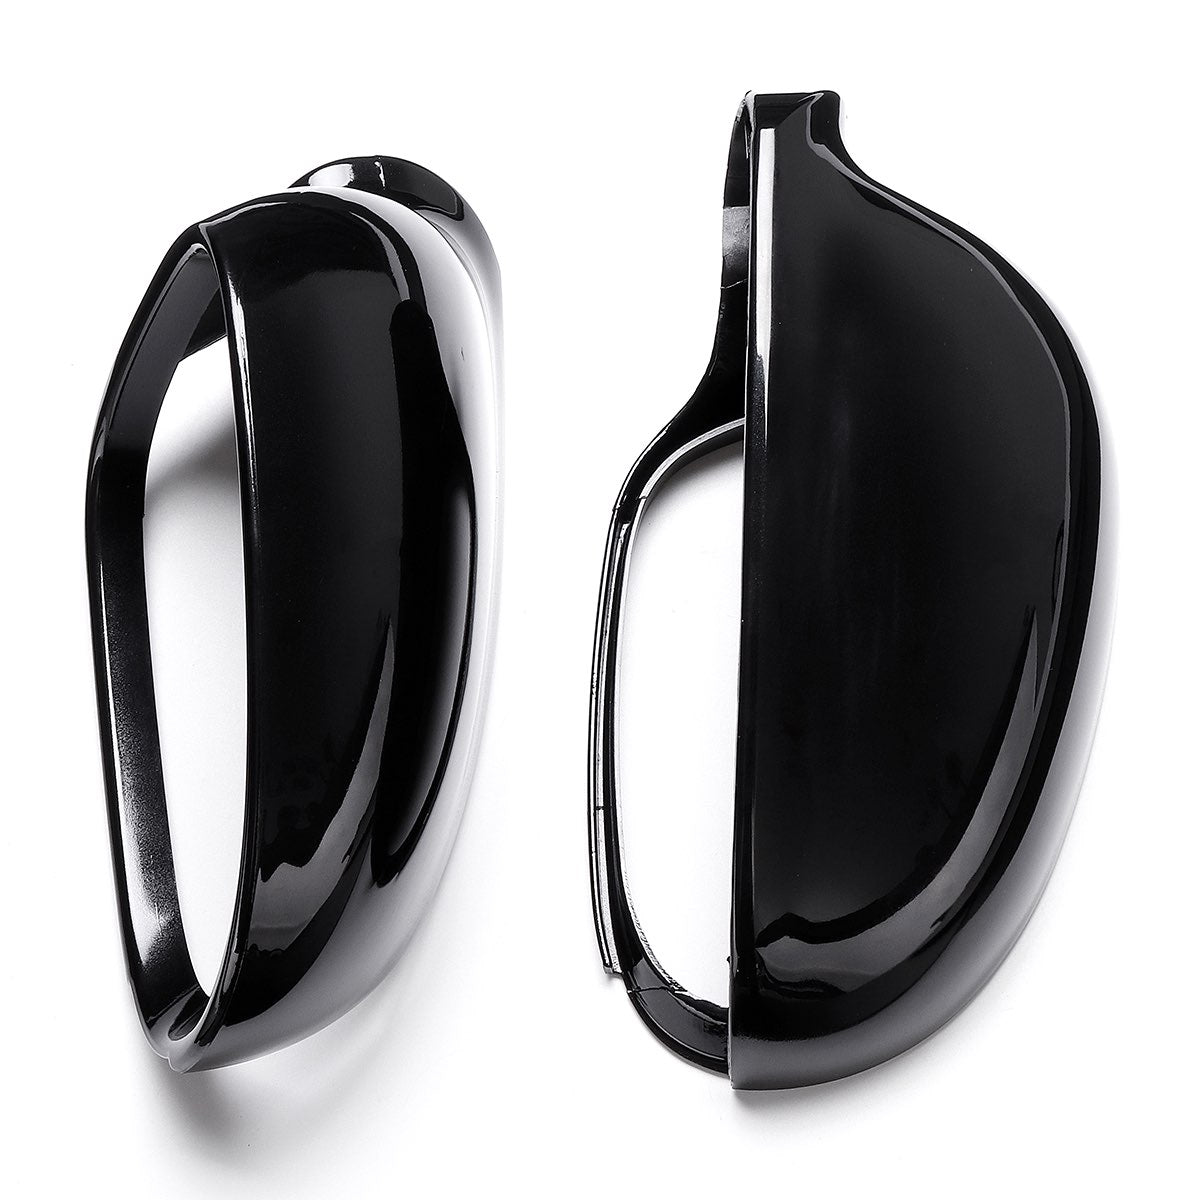 (LEFT) Black Rearview Wing Mirror Cover Casing Suit For Volkswagen Suit For VW Jetta Golf MK5